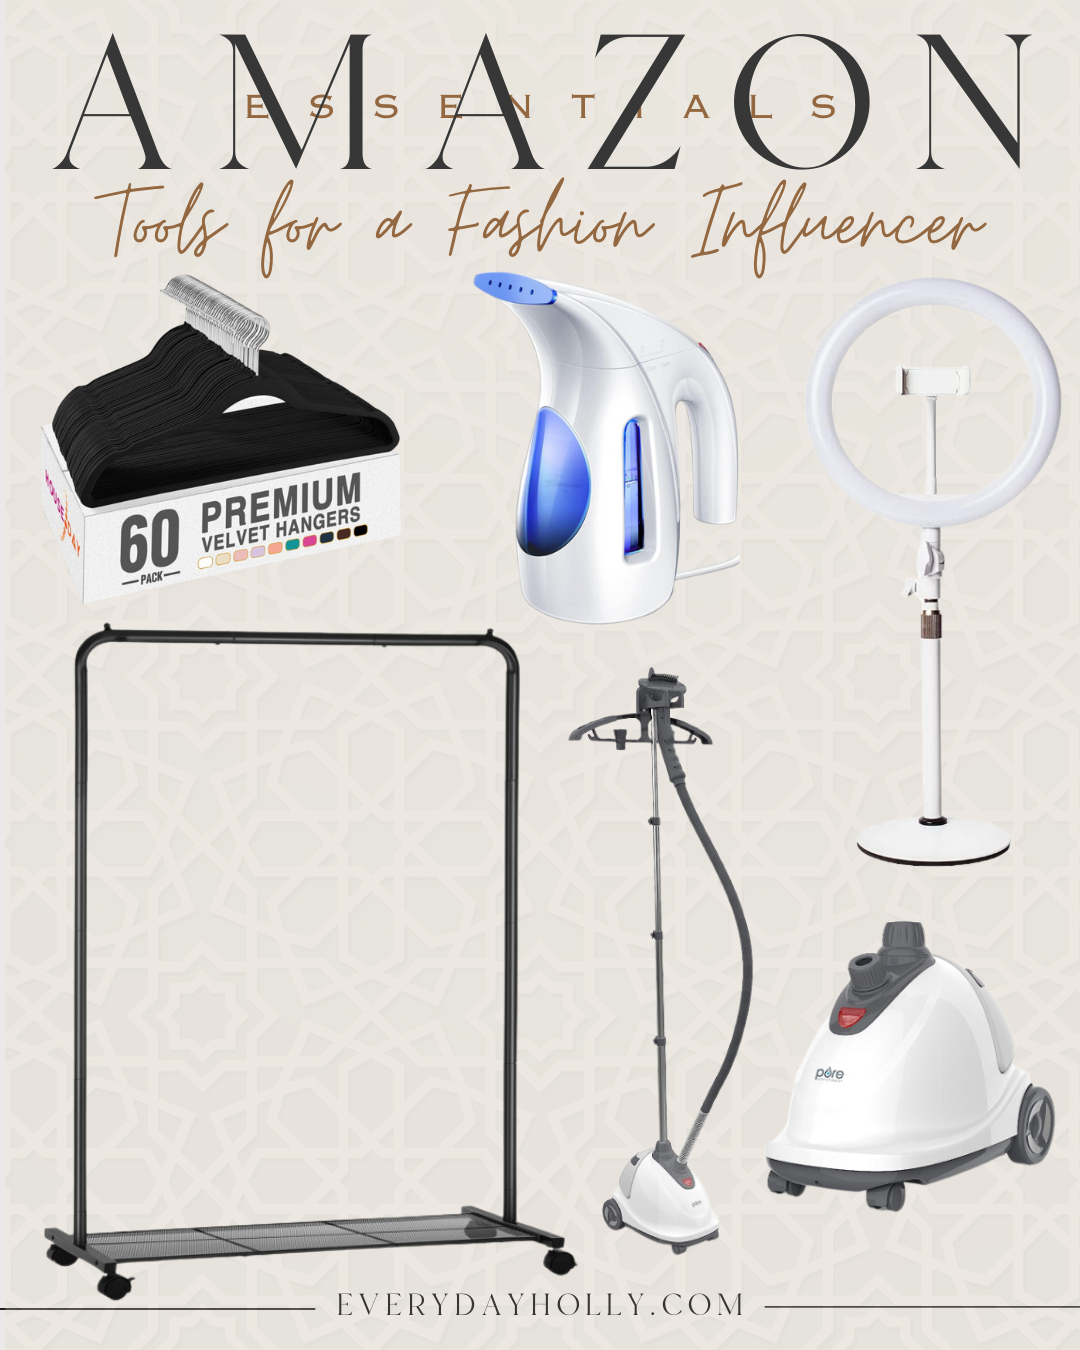 step by step guide to becoming a successful influencer | how to guide,
fashion influencer, influencer, garment rack, steamer, garment steamer, hangers, ring light, lighting, tripod, camera, successful